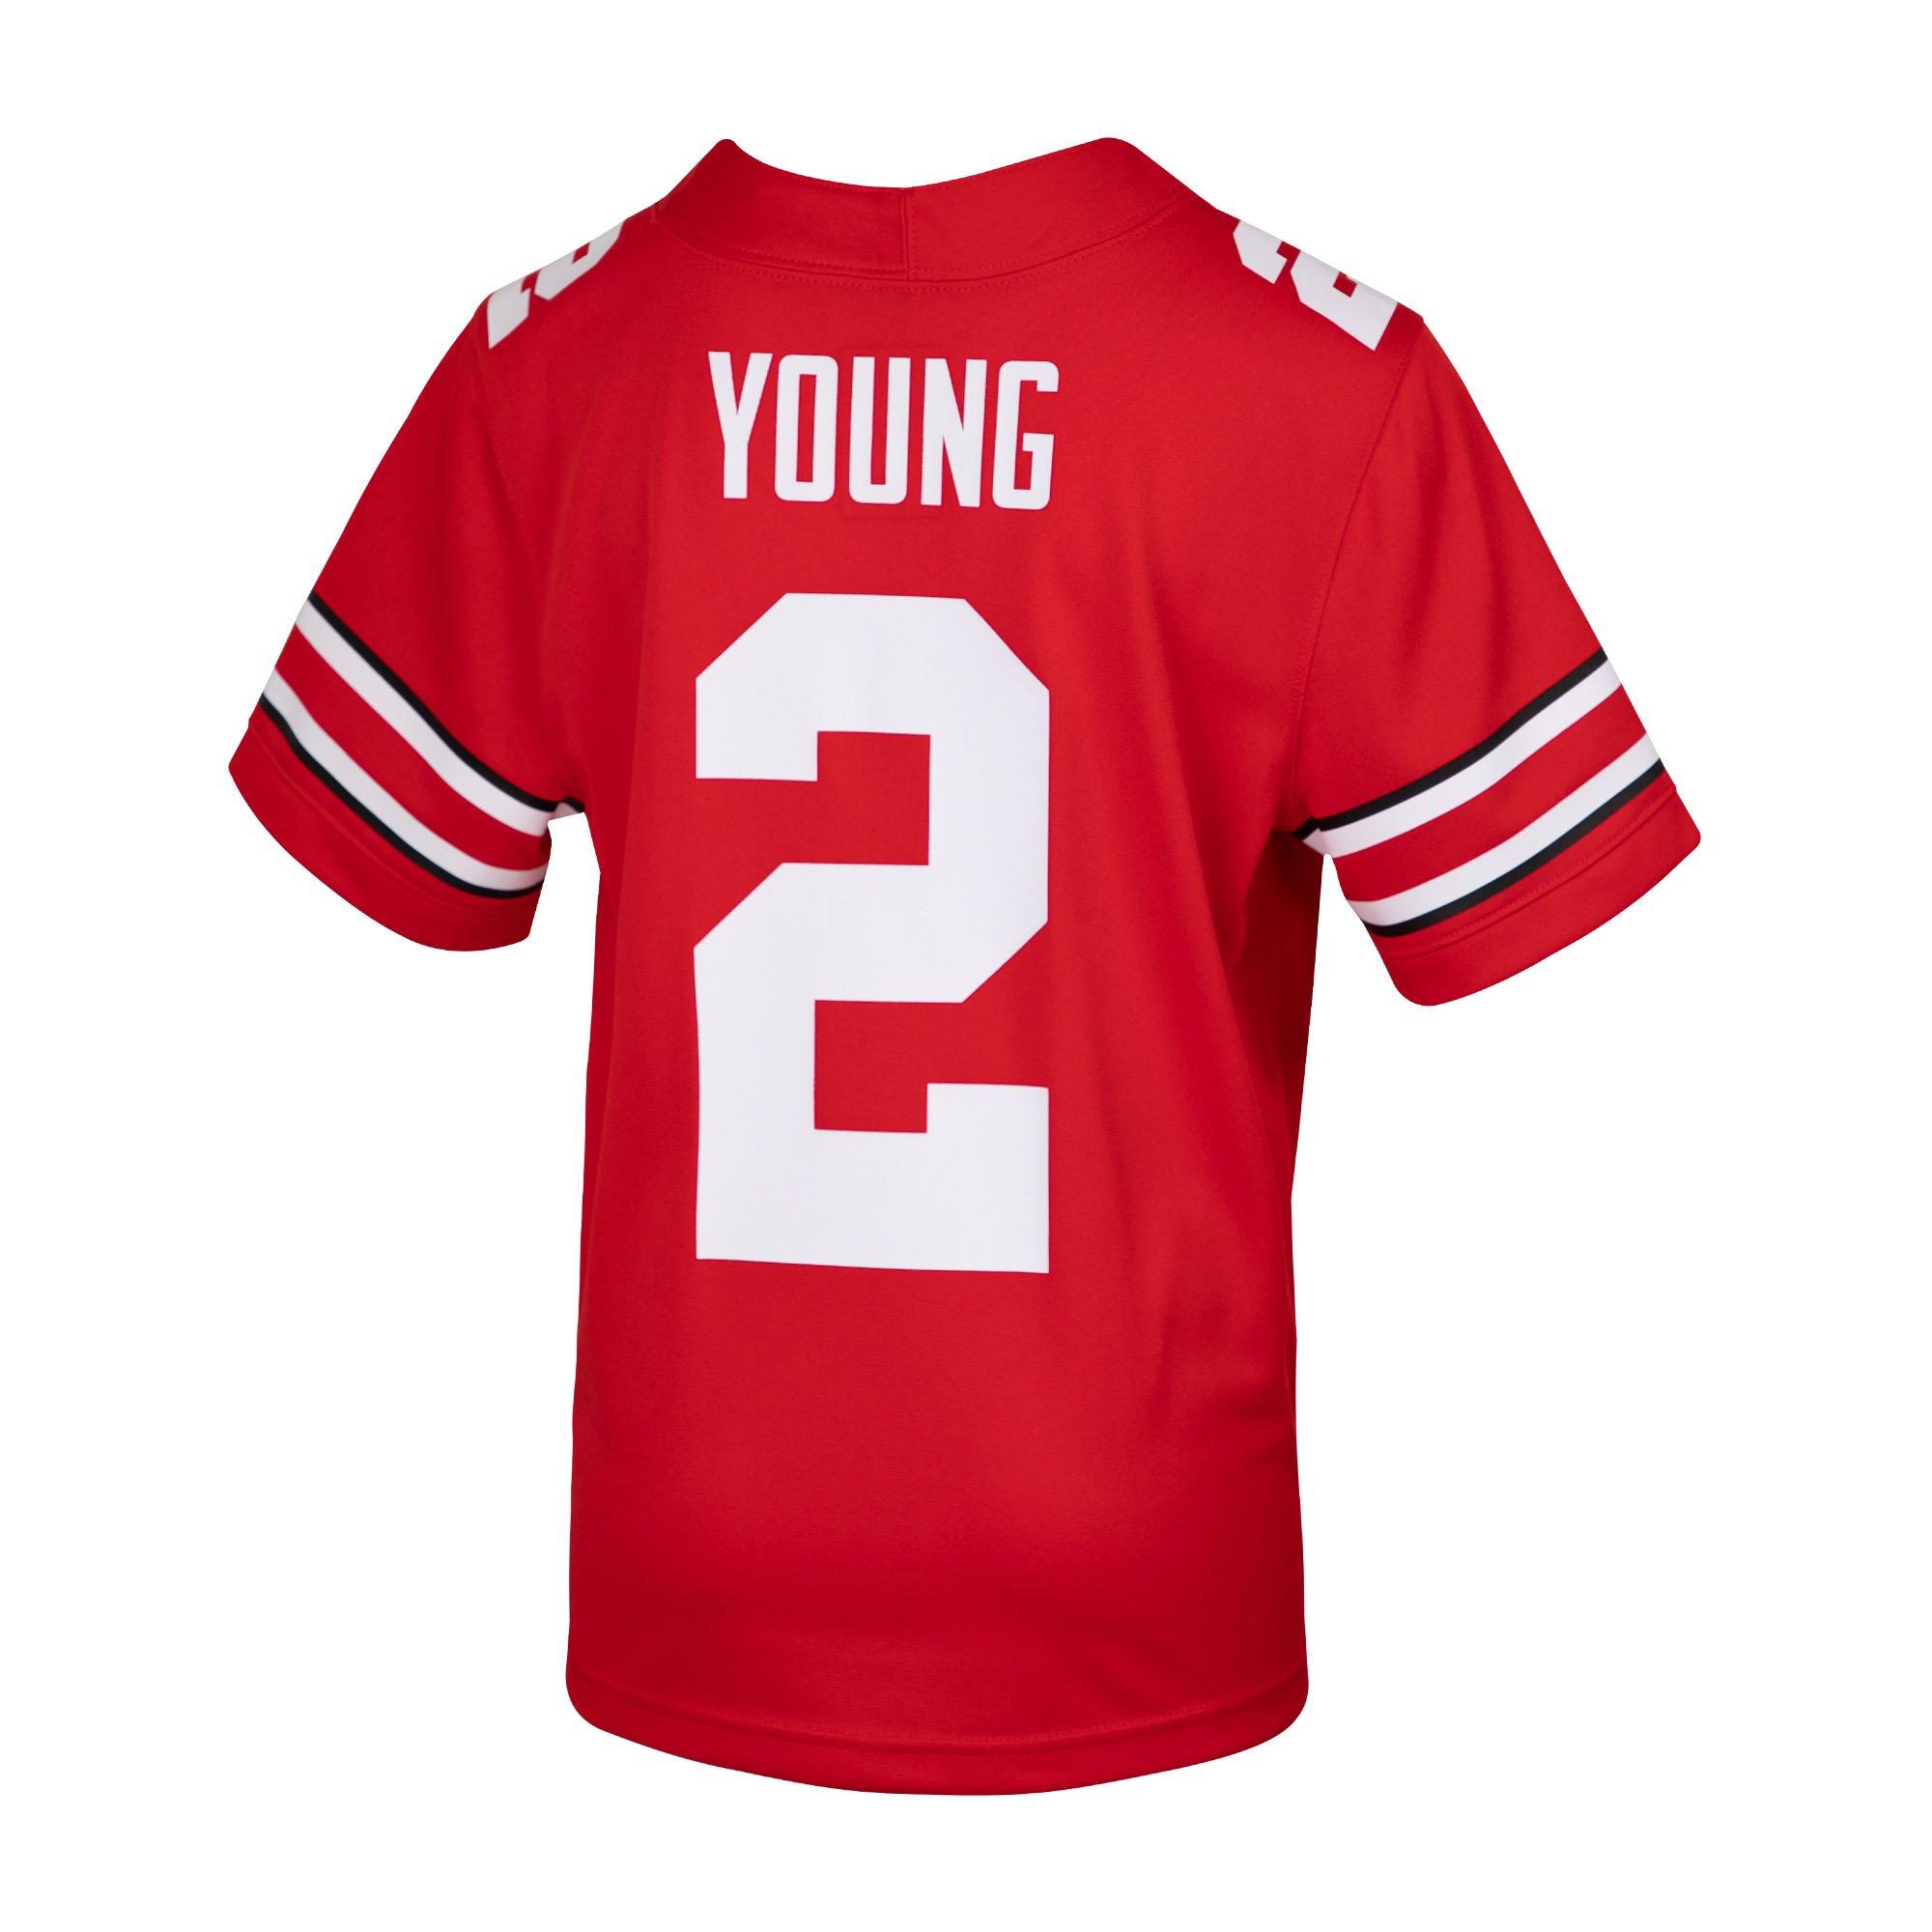 osu chase young jersey